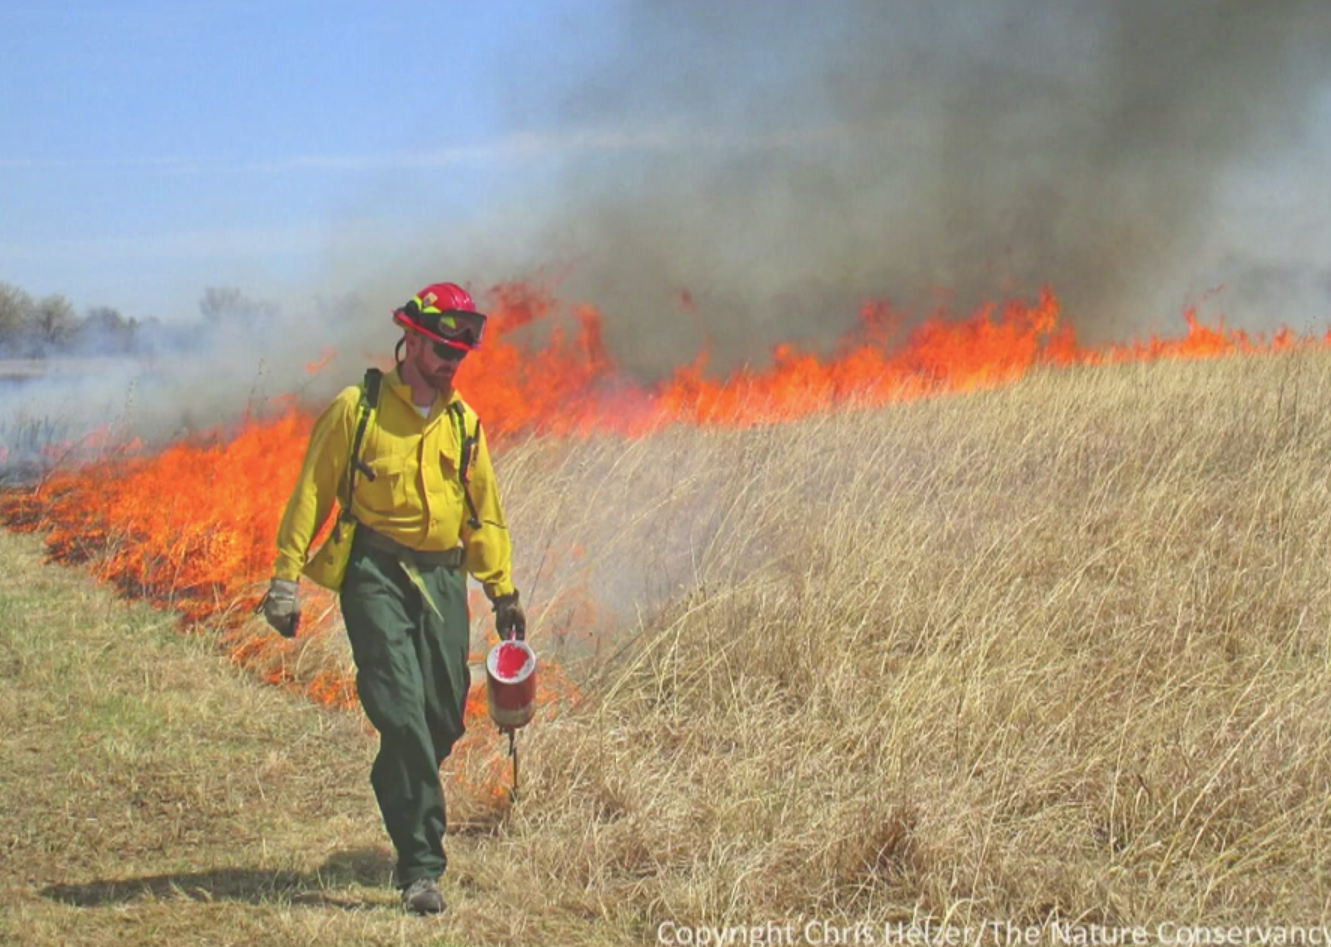 Tall dry grass has been lit afire by a firefighter to clear landscape.